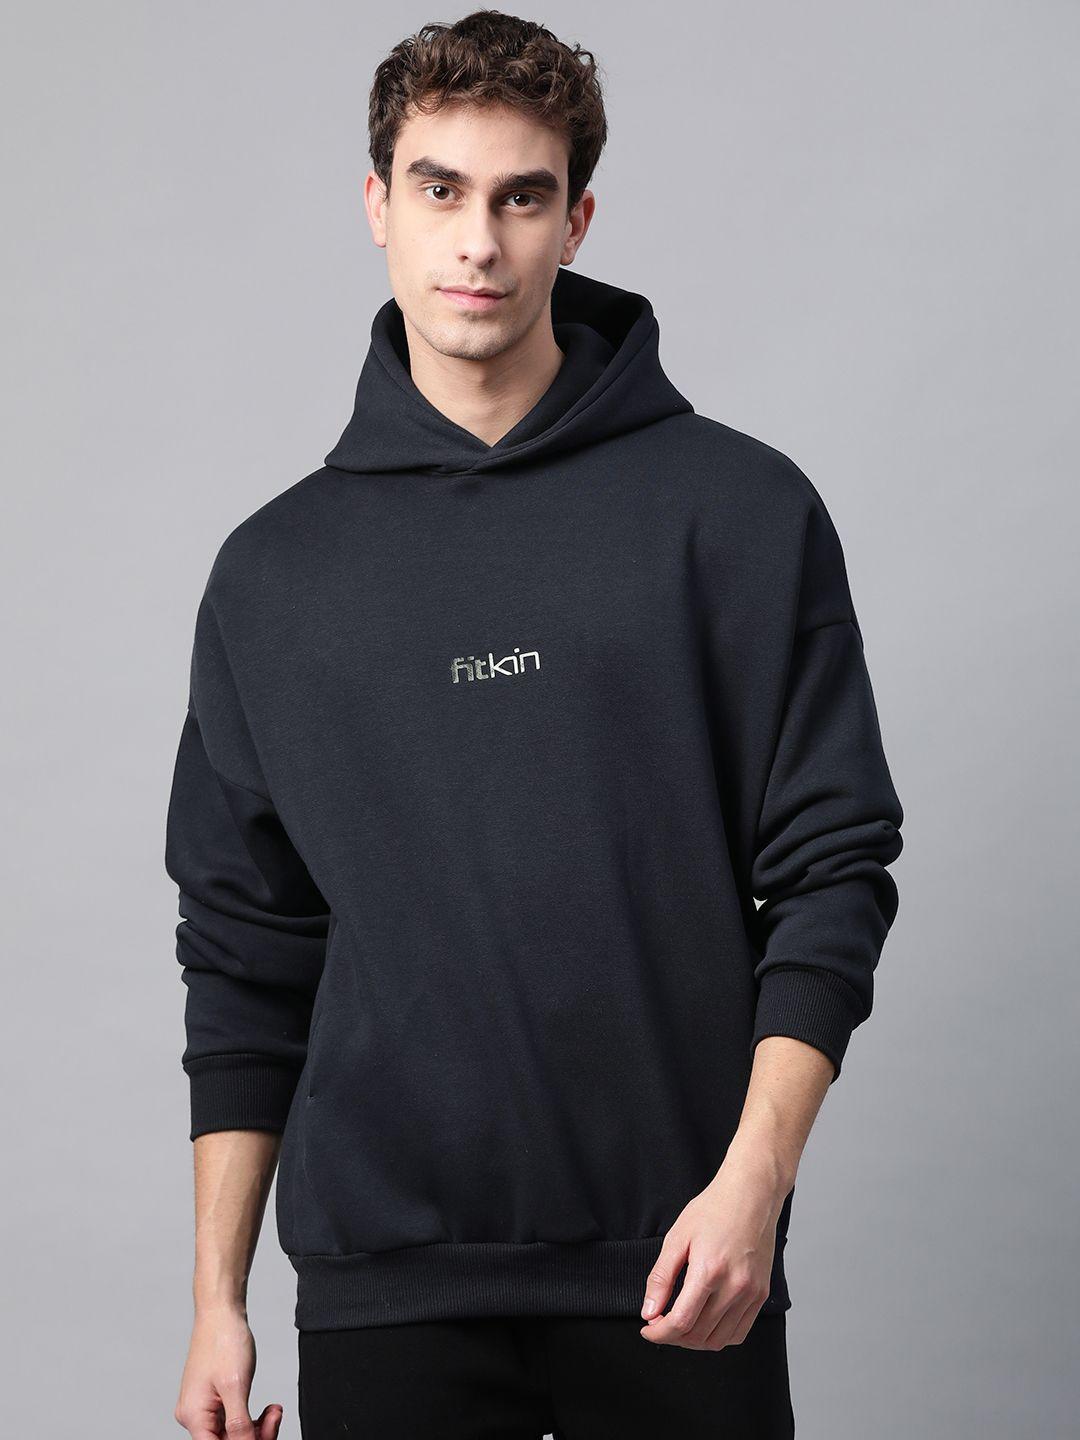 fitkin-men-navy-blue-solid-hooded-winter-sweatshirt-with-brand-logo-print-detail